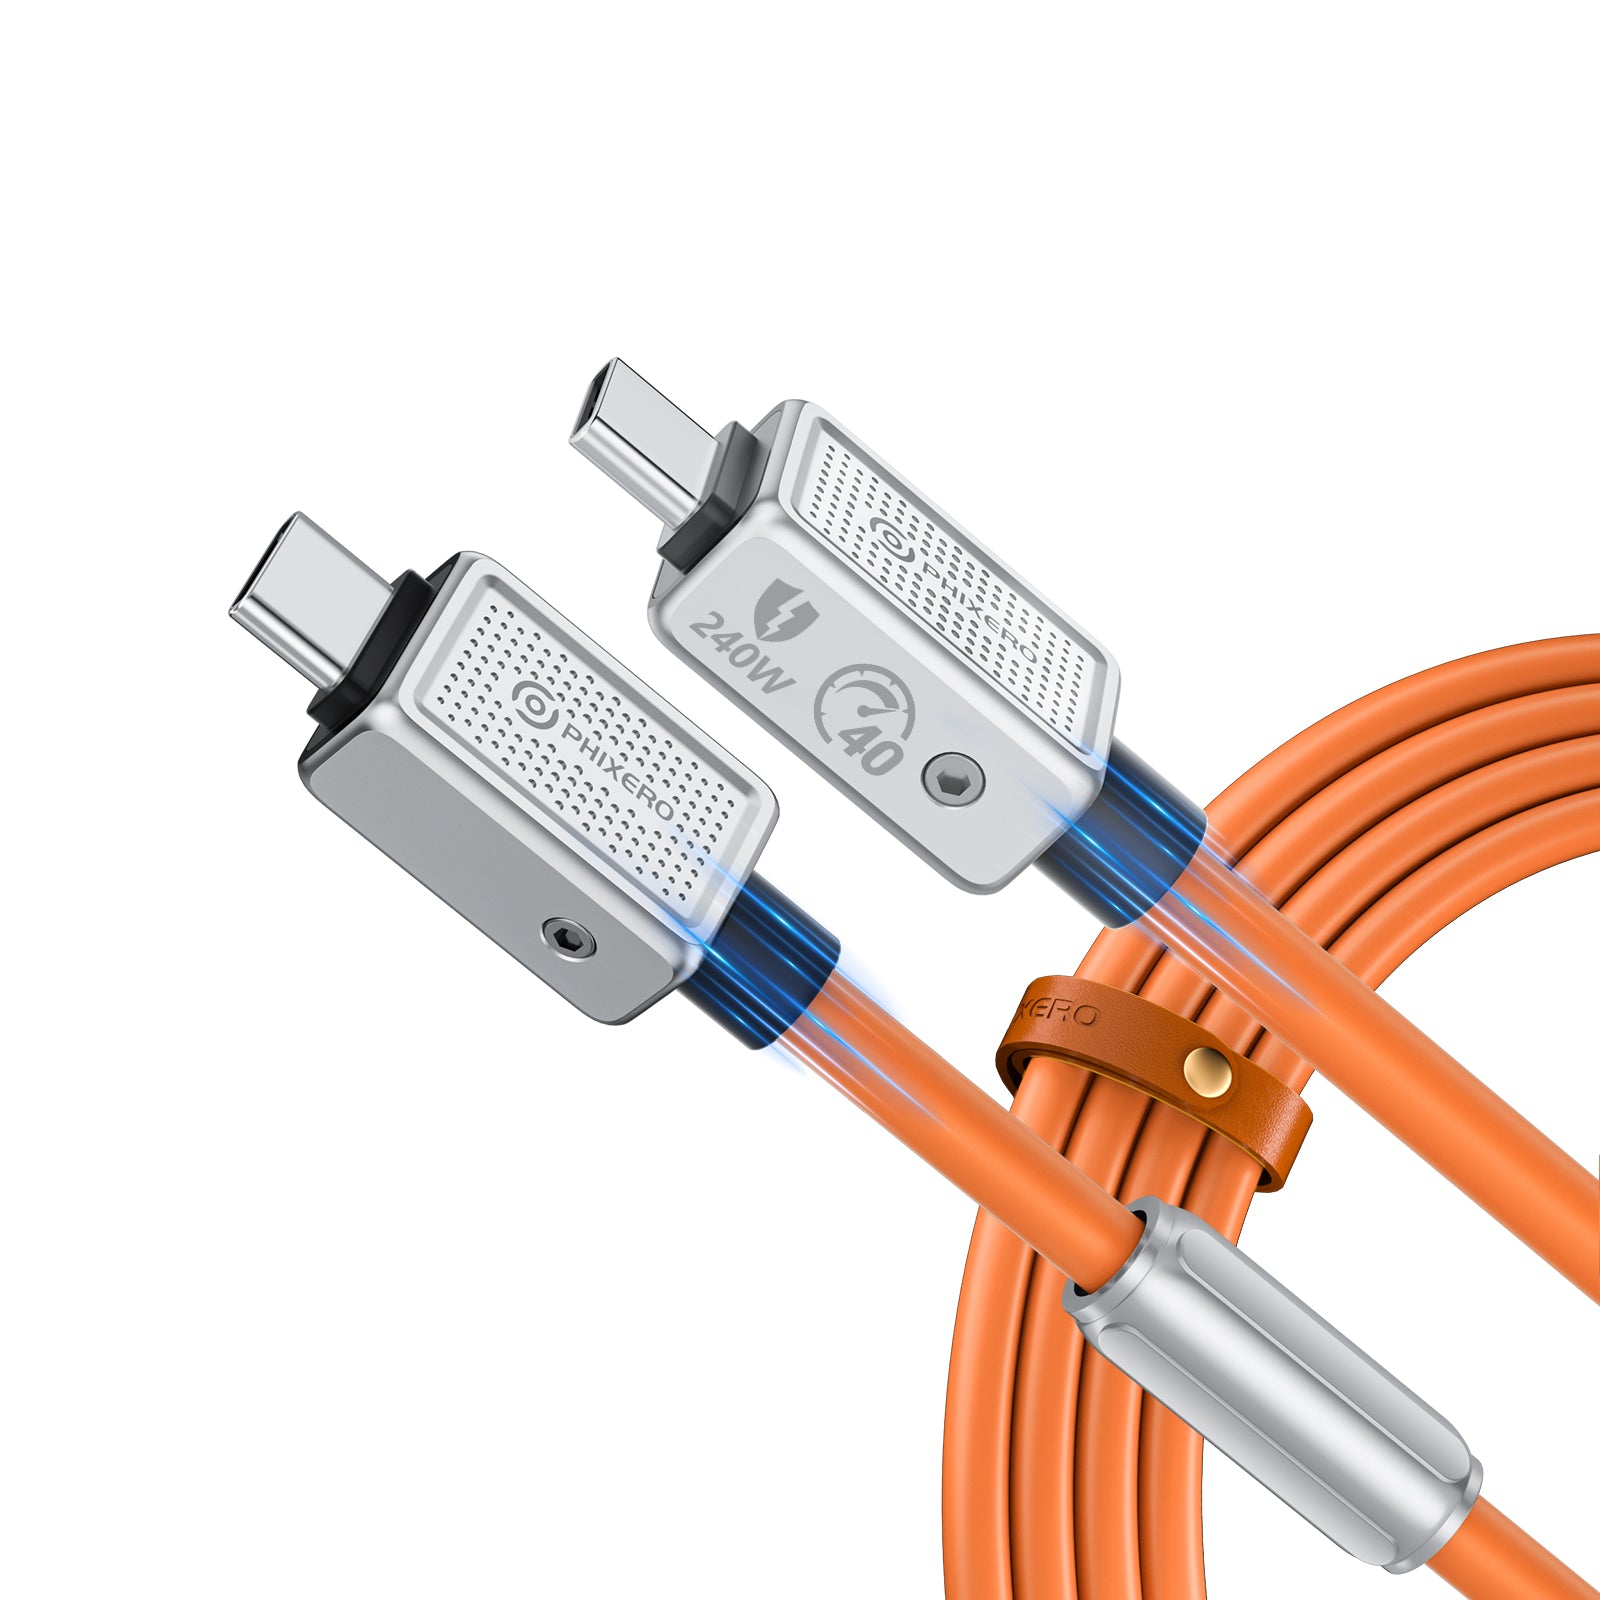 PHIXERO USB 4 Cable 5 ft, Supports 8K/60HZ HD Display, 40 Gbps Data Transfer, 240W C to C Type Fast Charging Cable, for Laptop, Hub, Docking, and More(Orange)